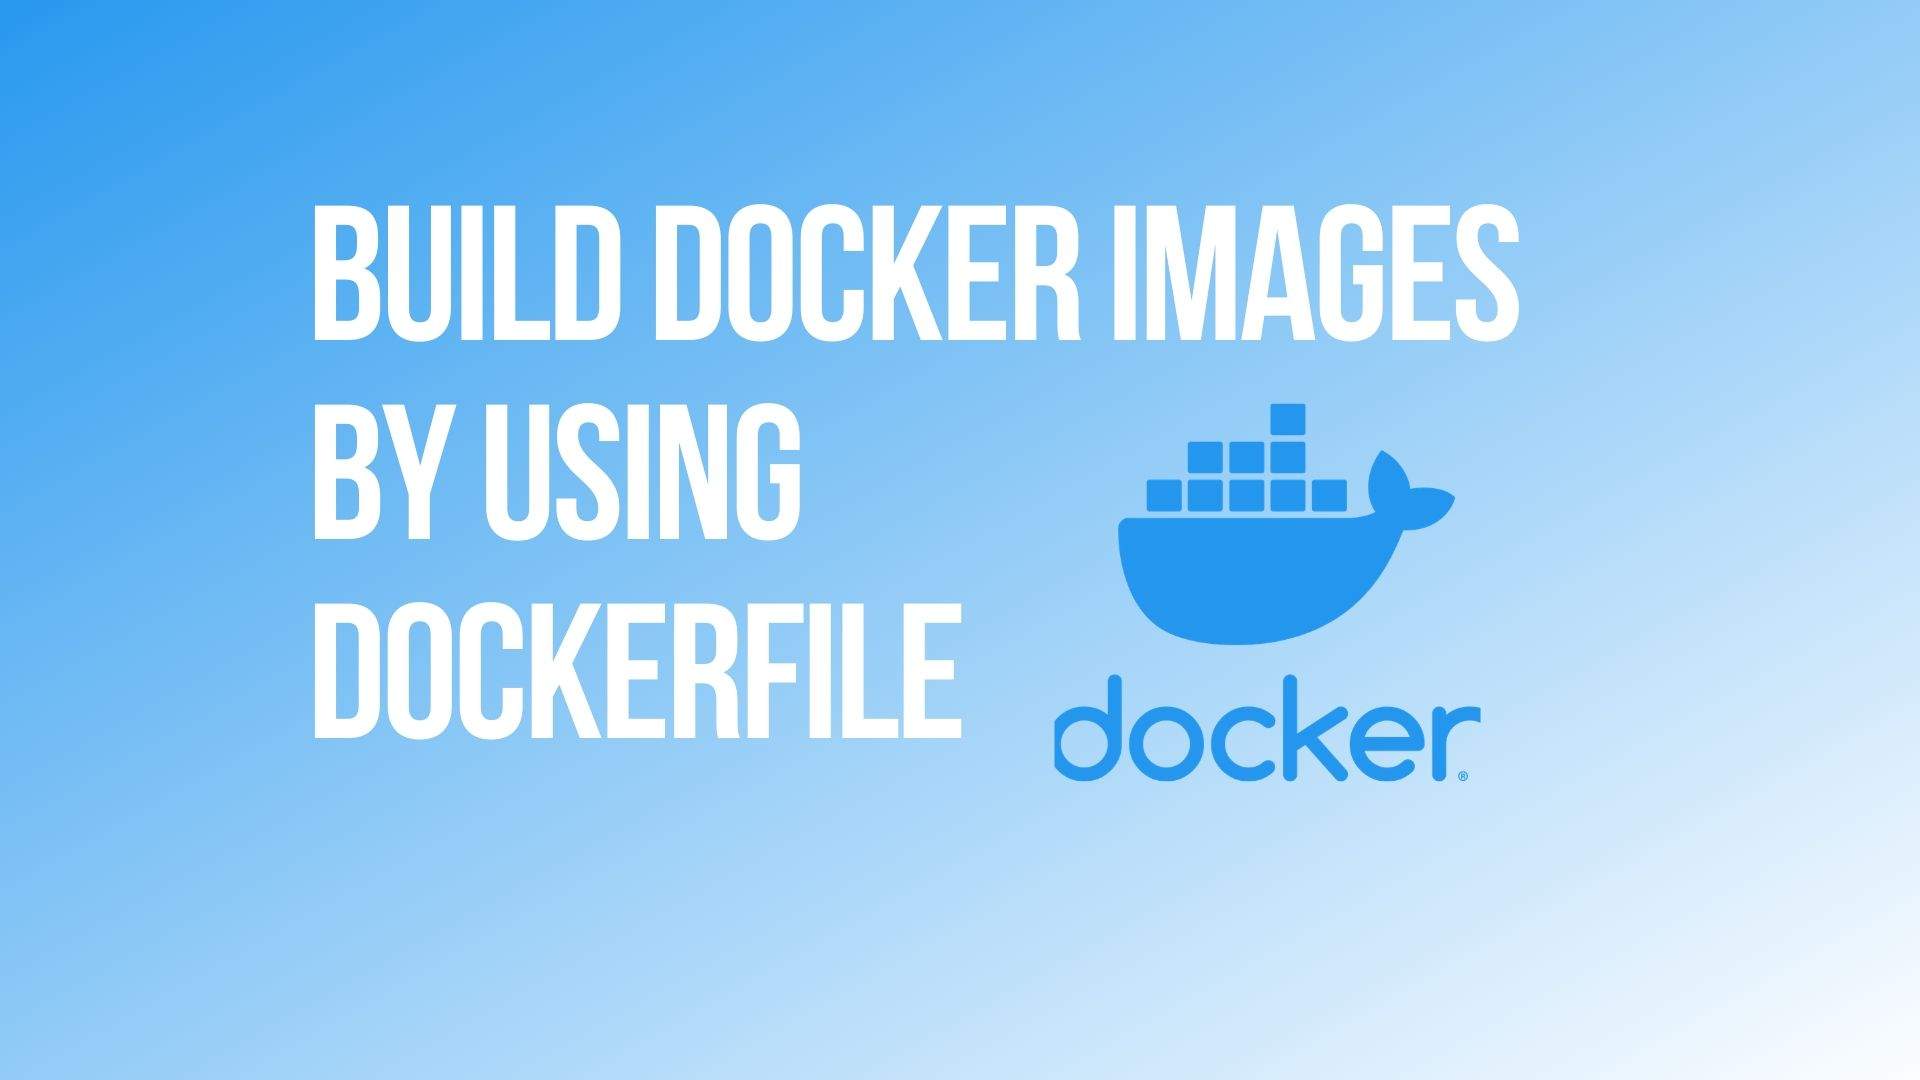 Build Docker Images by using Dockerfile